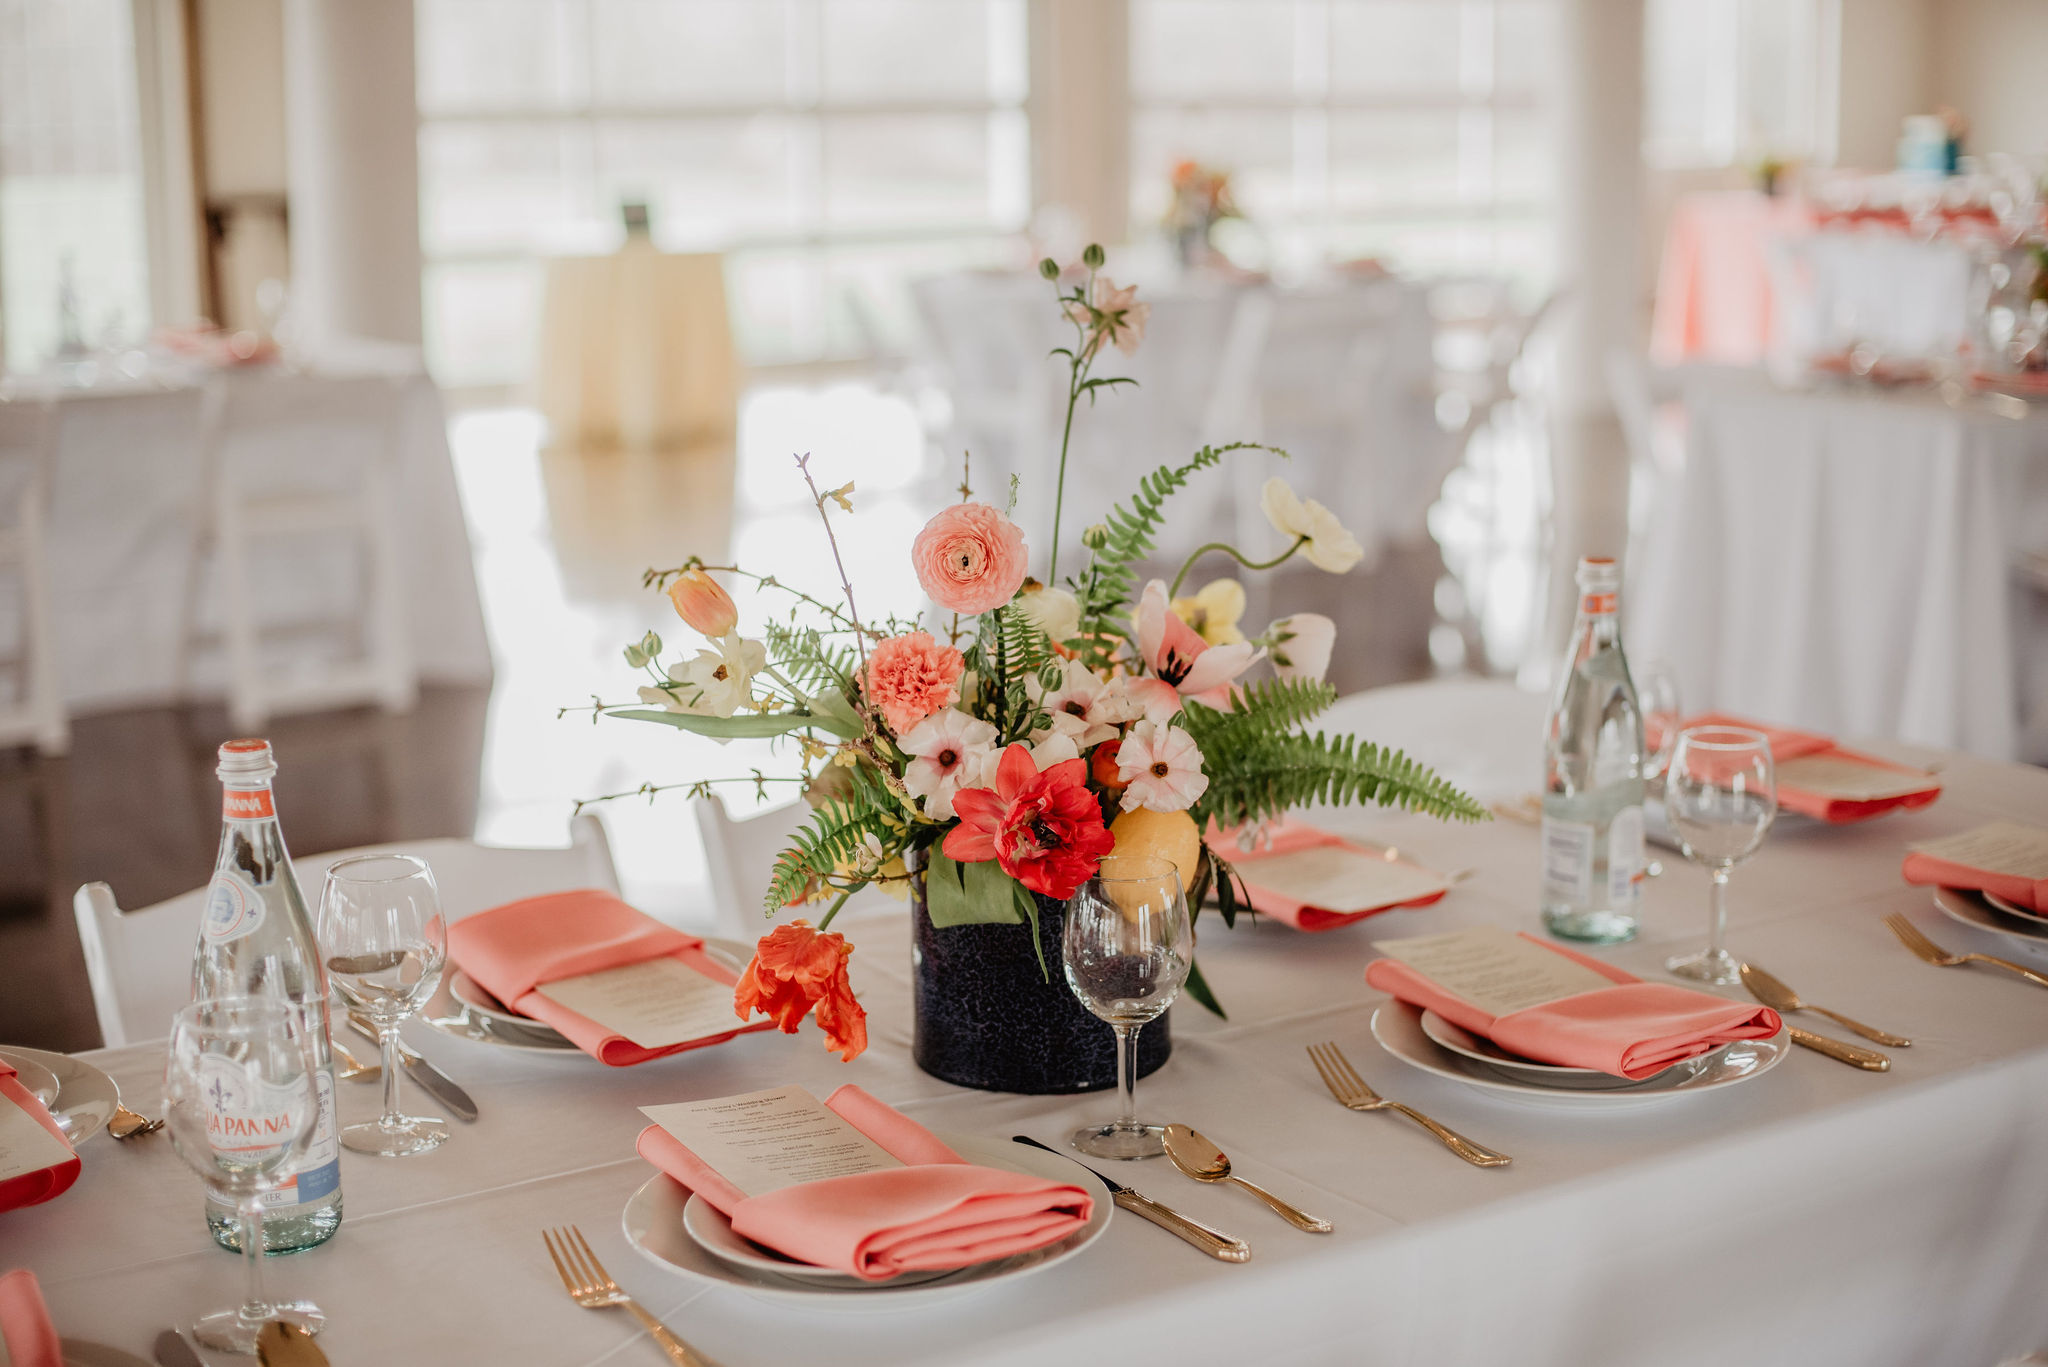 PINK AND WHITE TABLESCAPE WITH FLORALS AND PINK NAPKINS